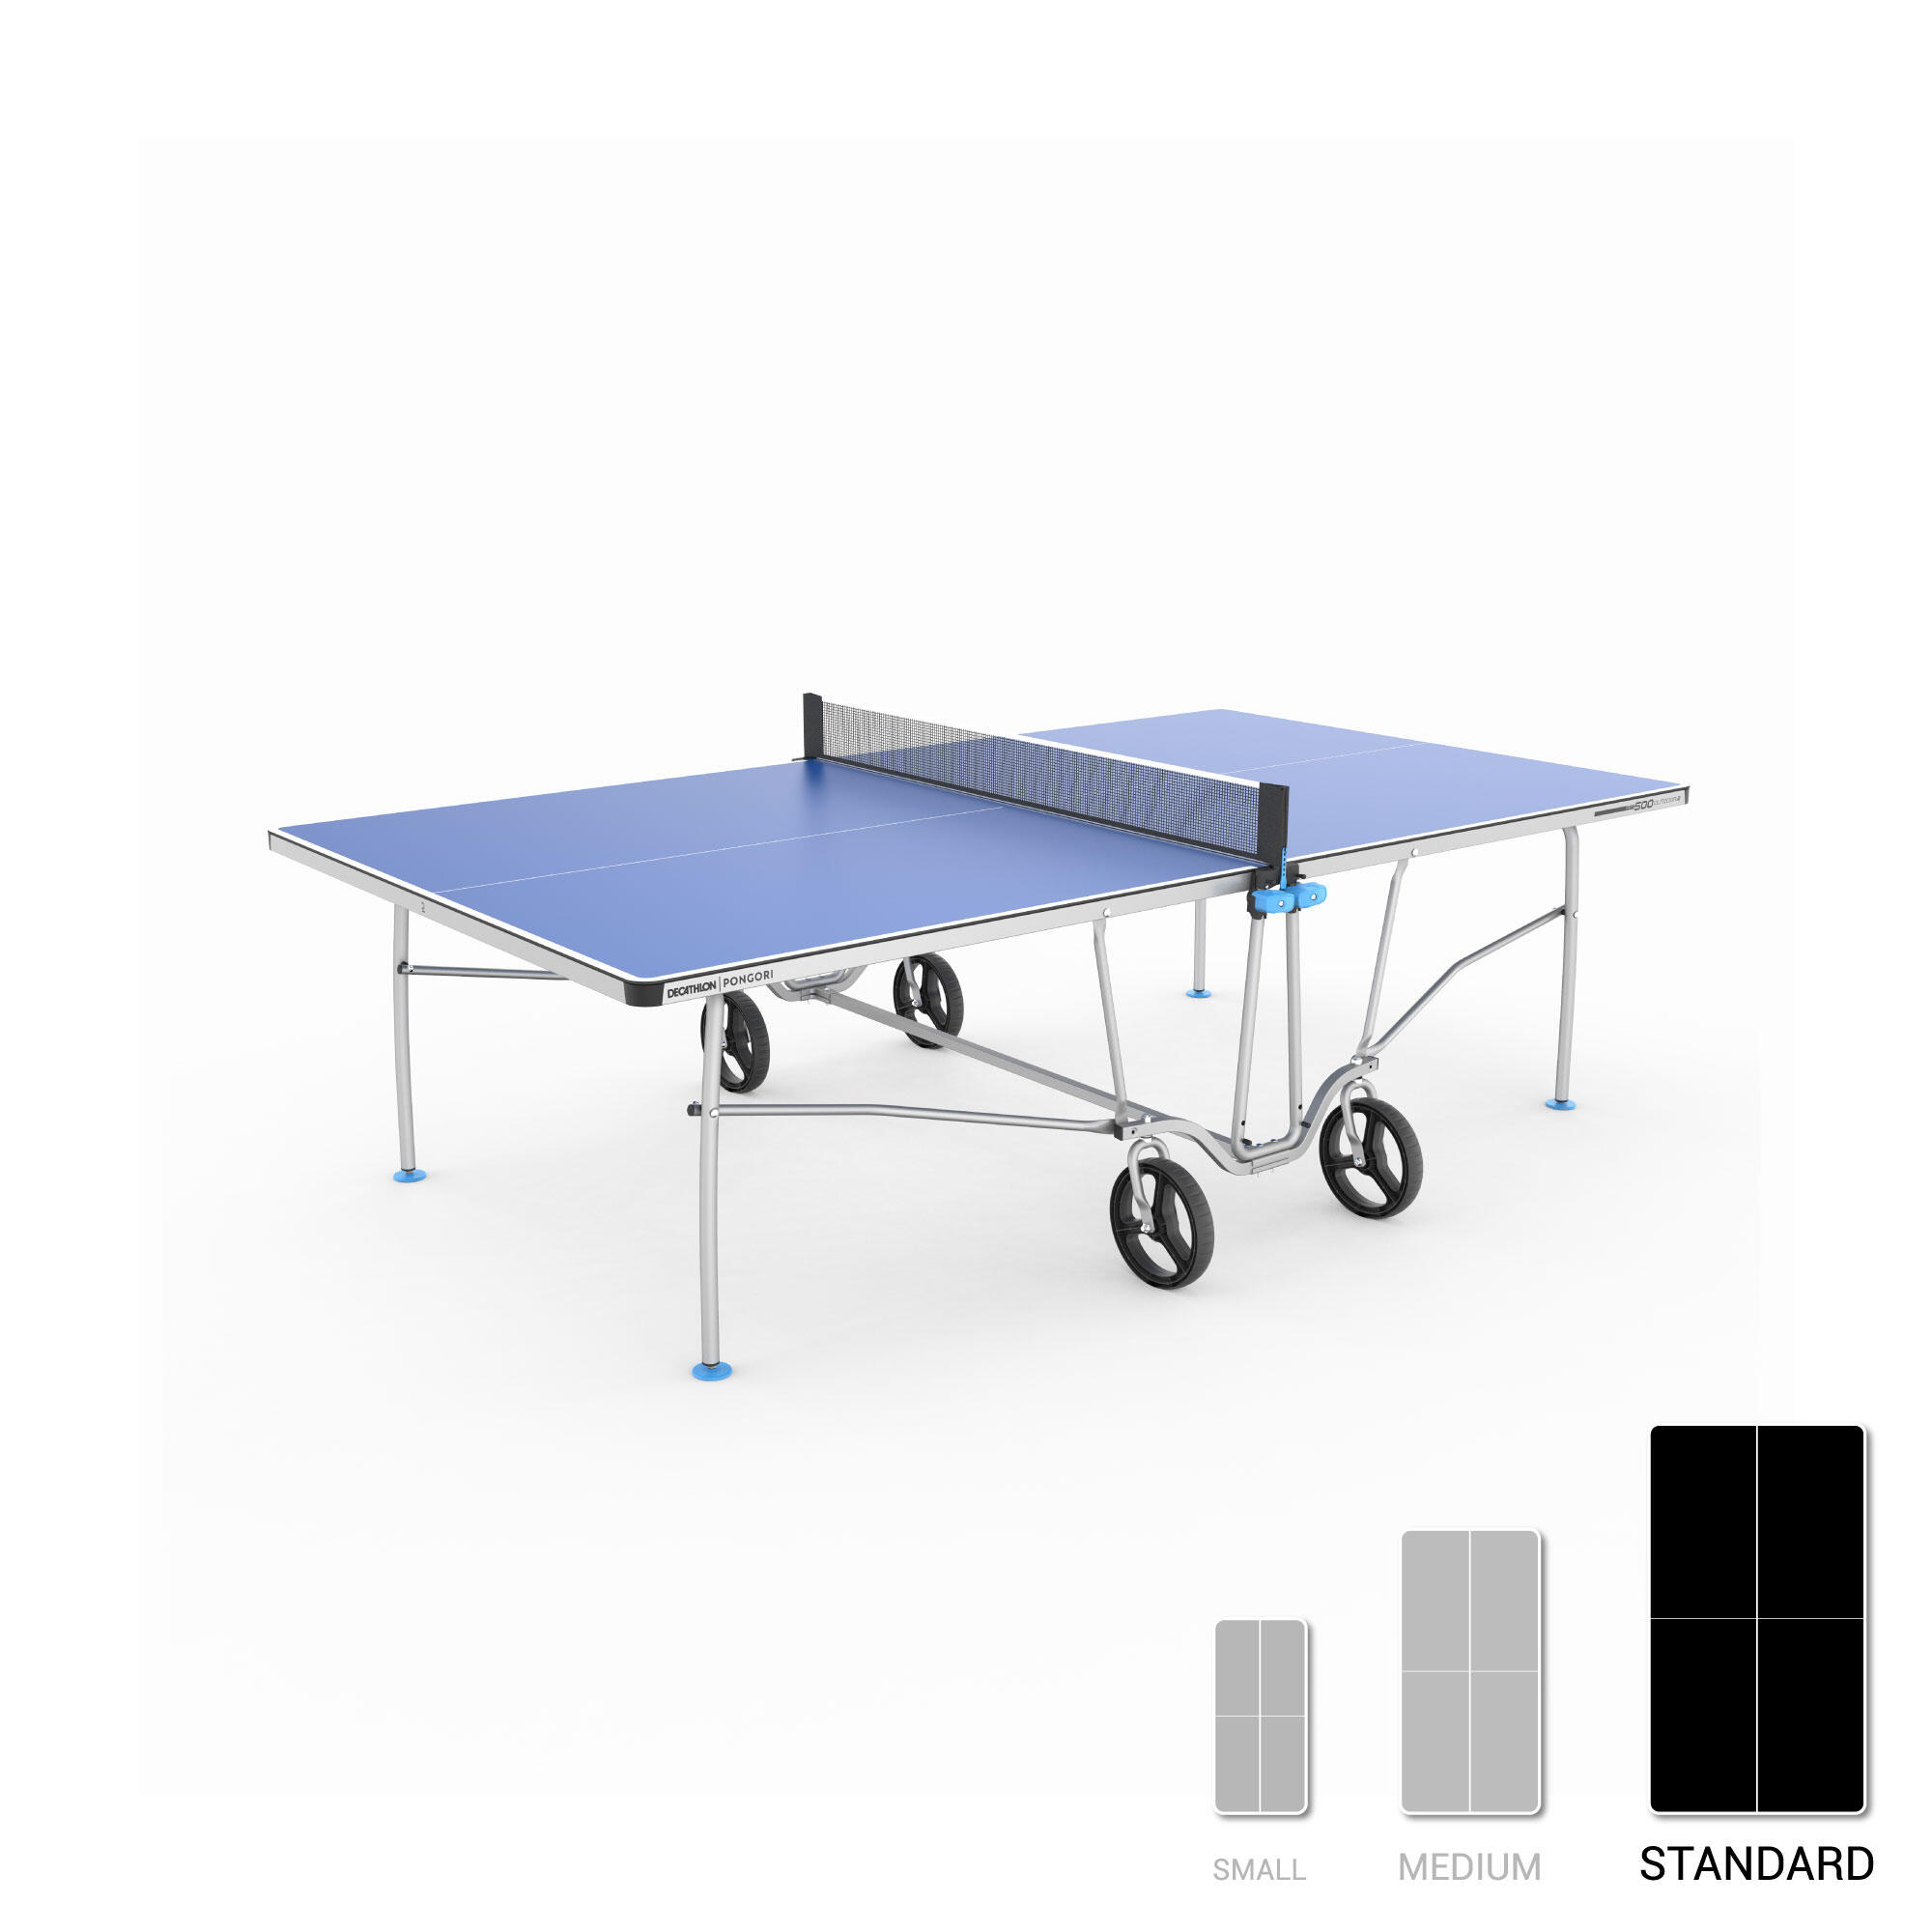 Outdoor Table Tennis Table PPT 500.2 - Blue 4/14